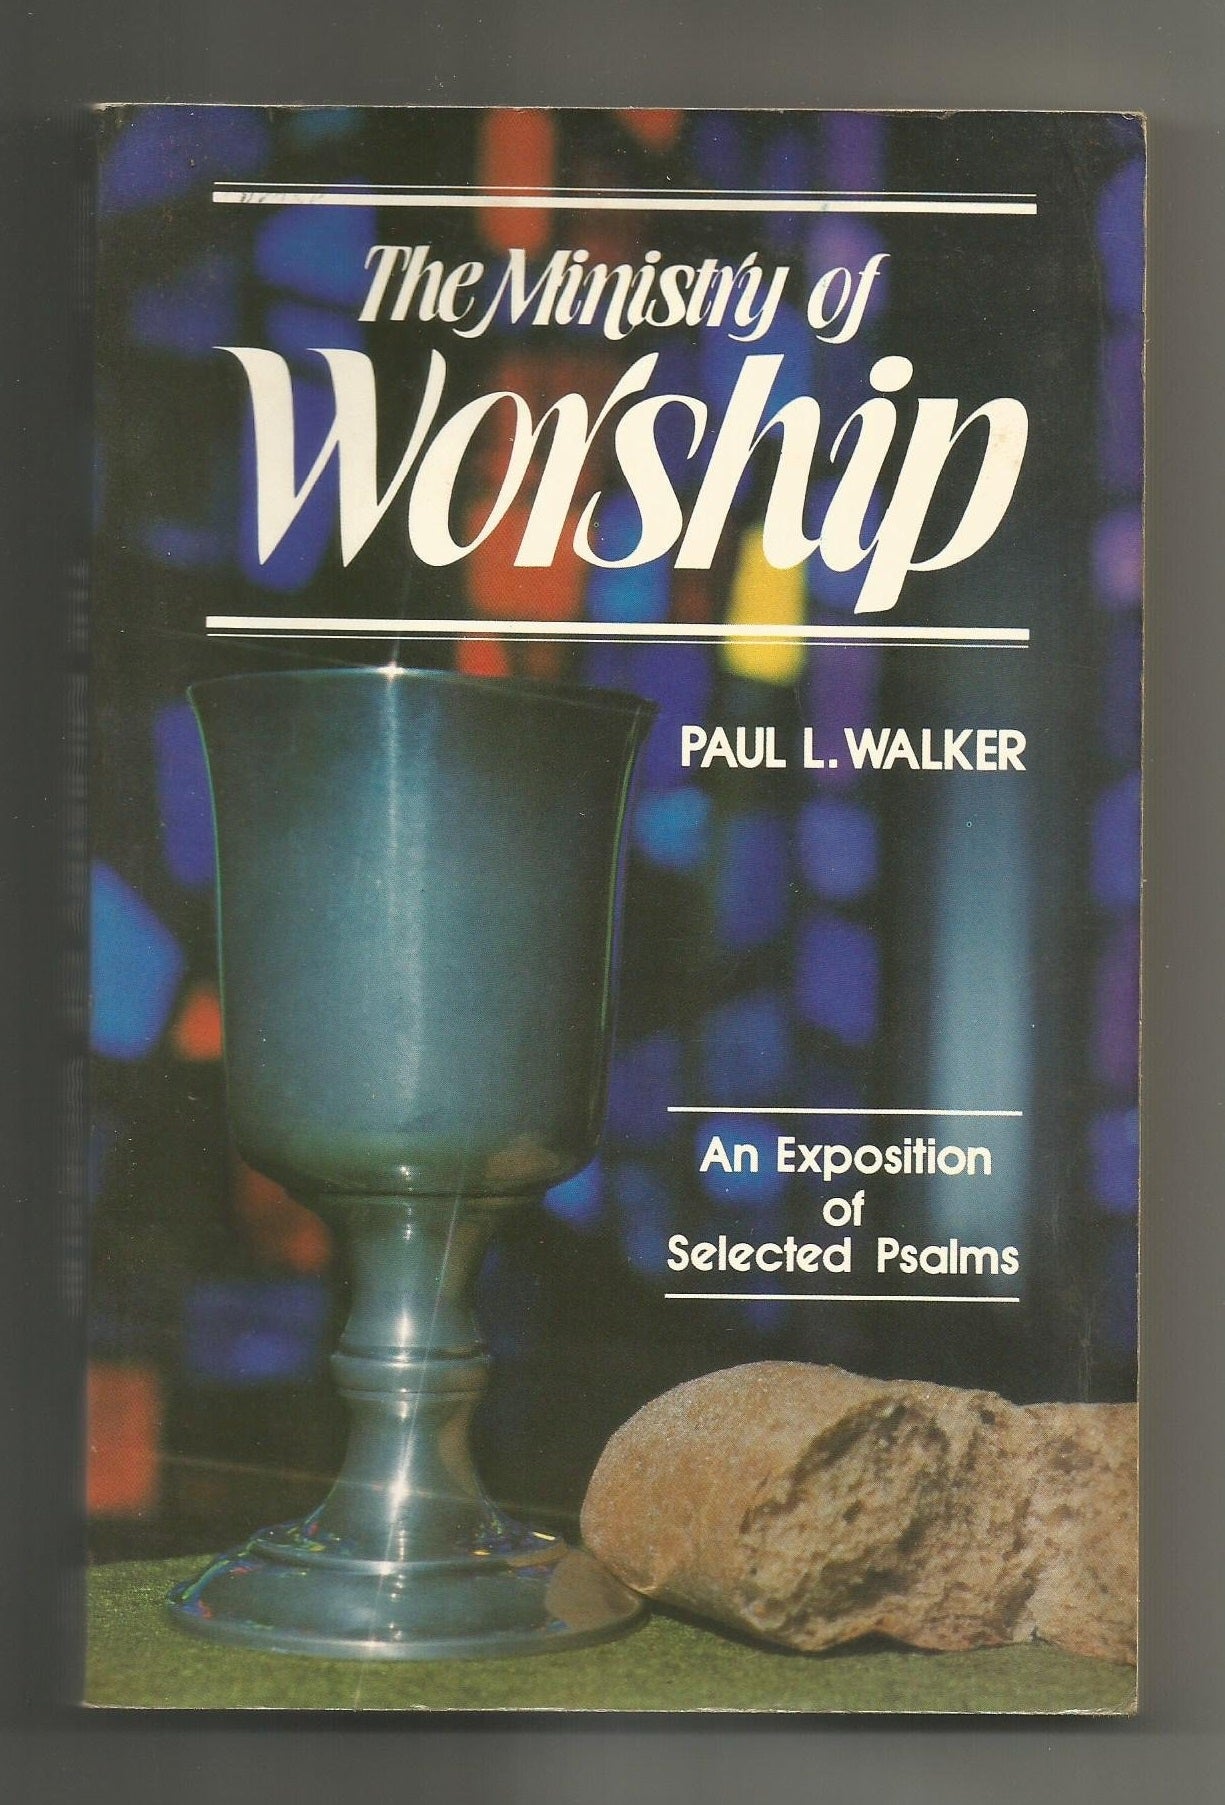 The Ministry of Worship (Paperback) Paul L. Walker